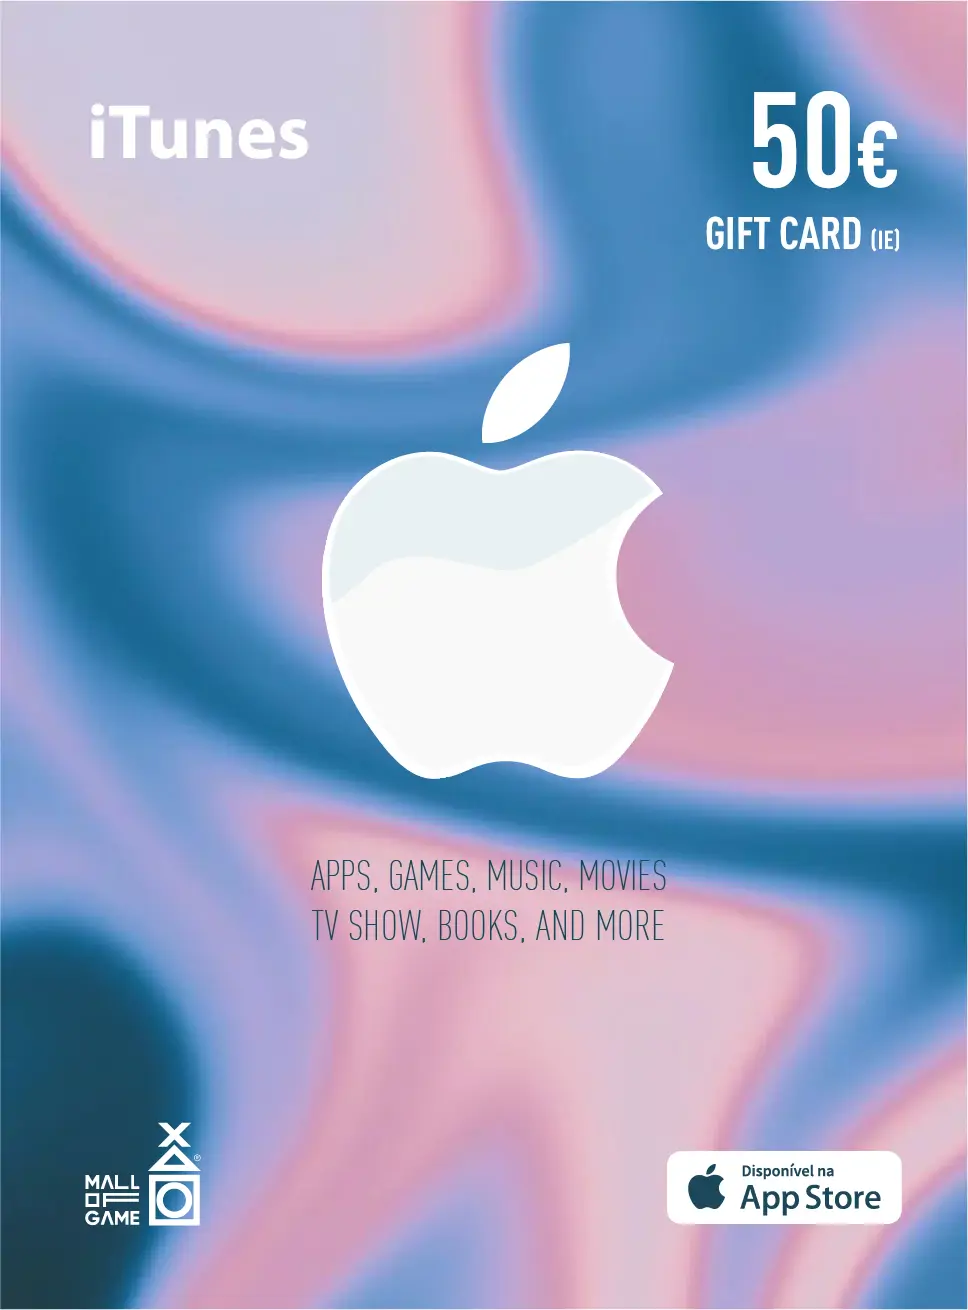 iTunes EUR50 Gift Card (IE)